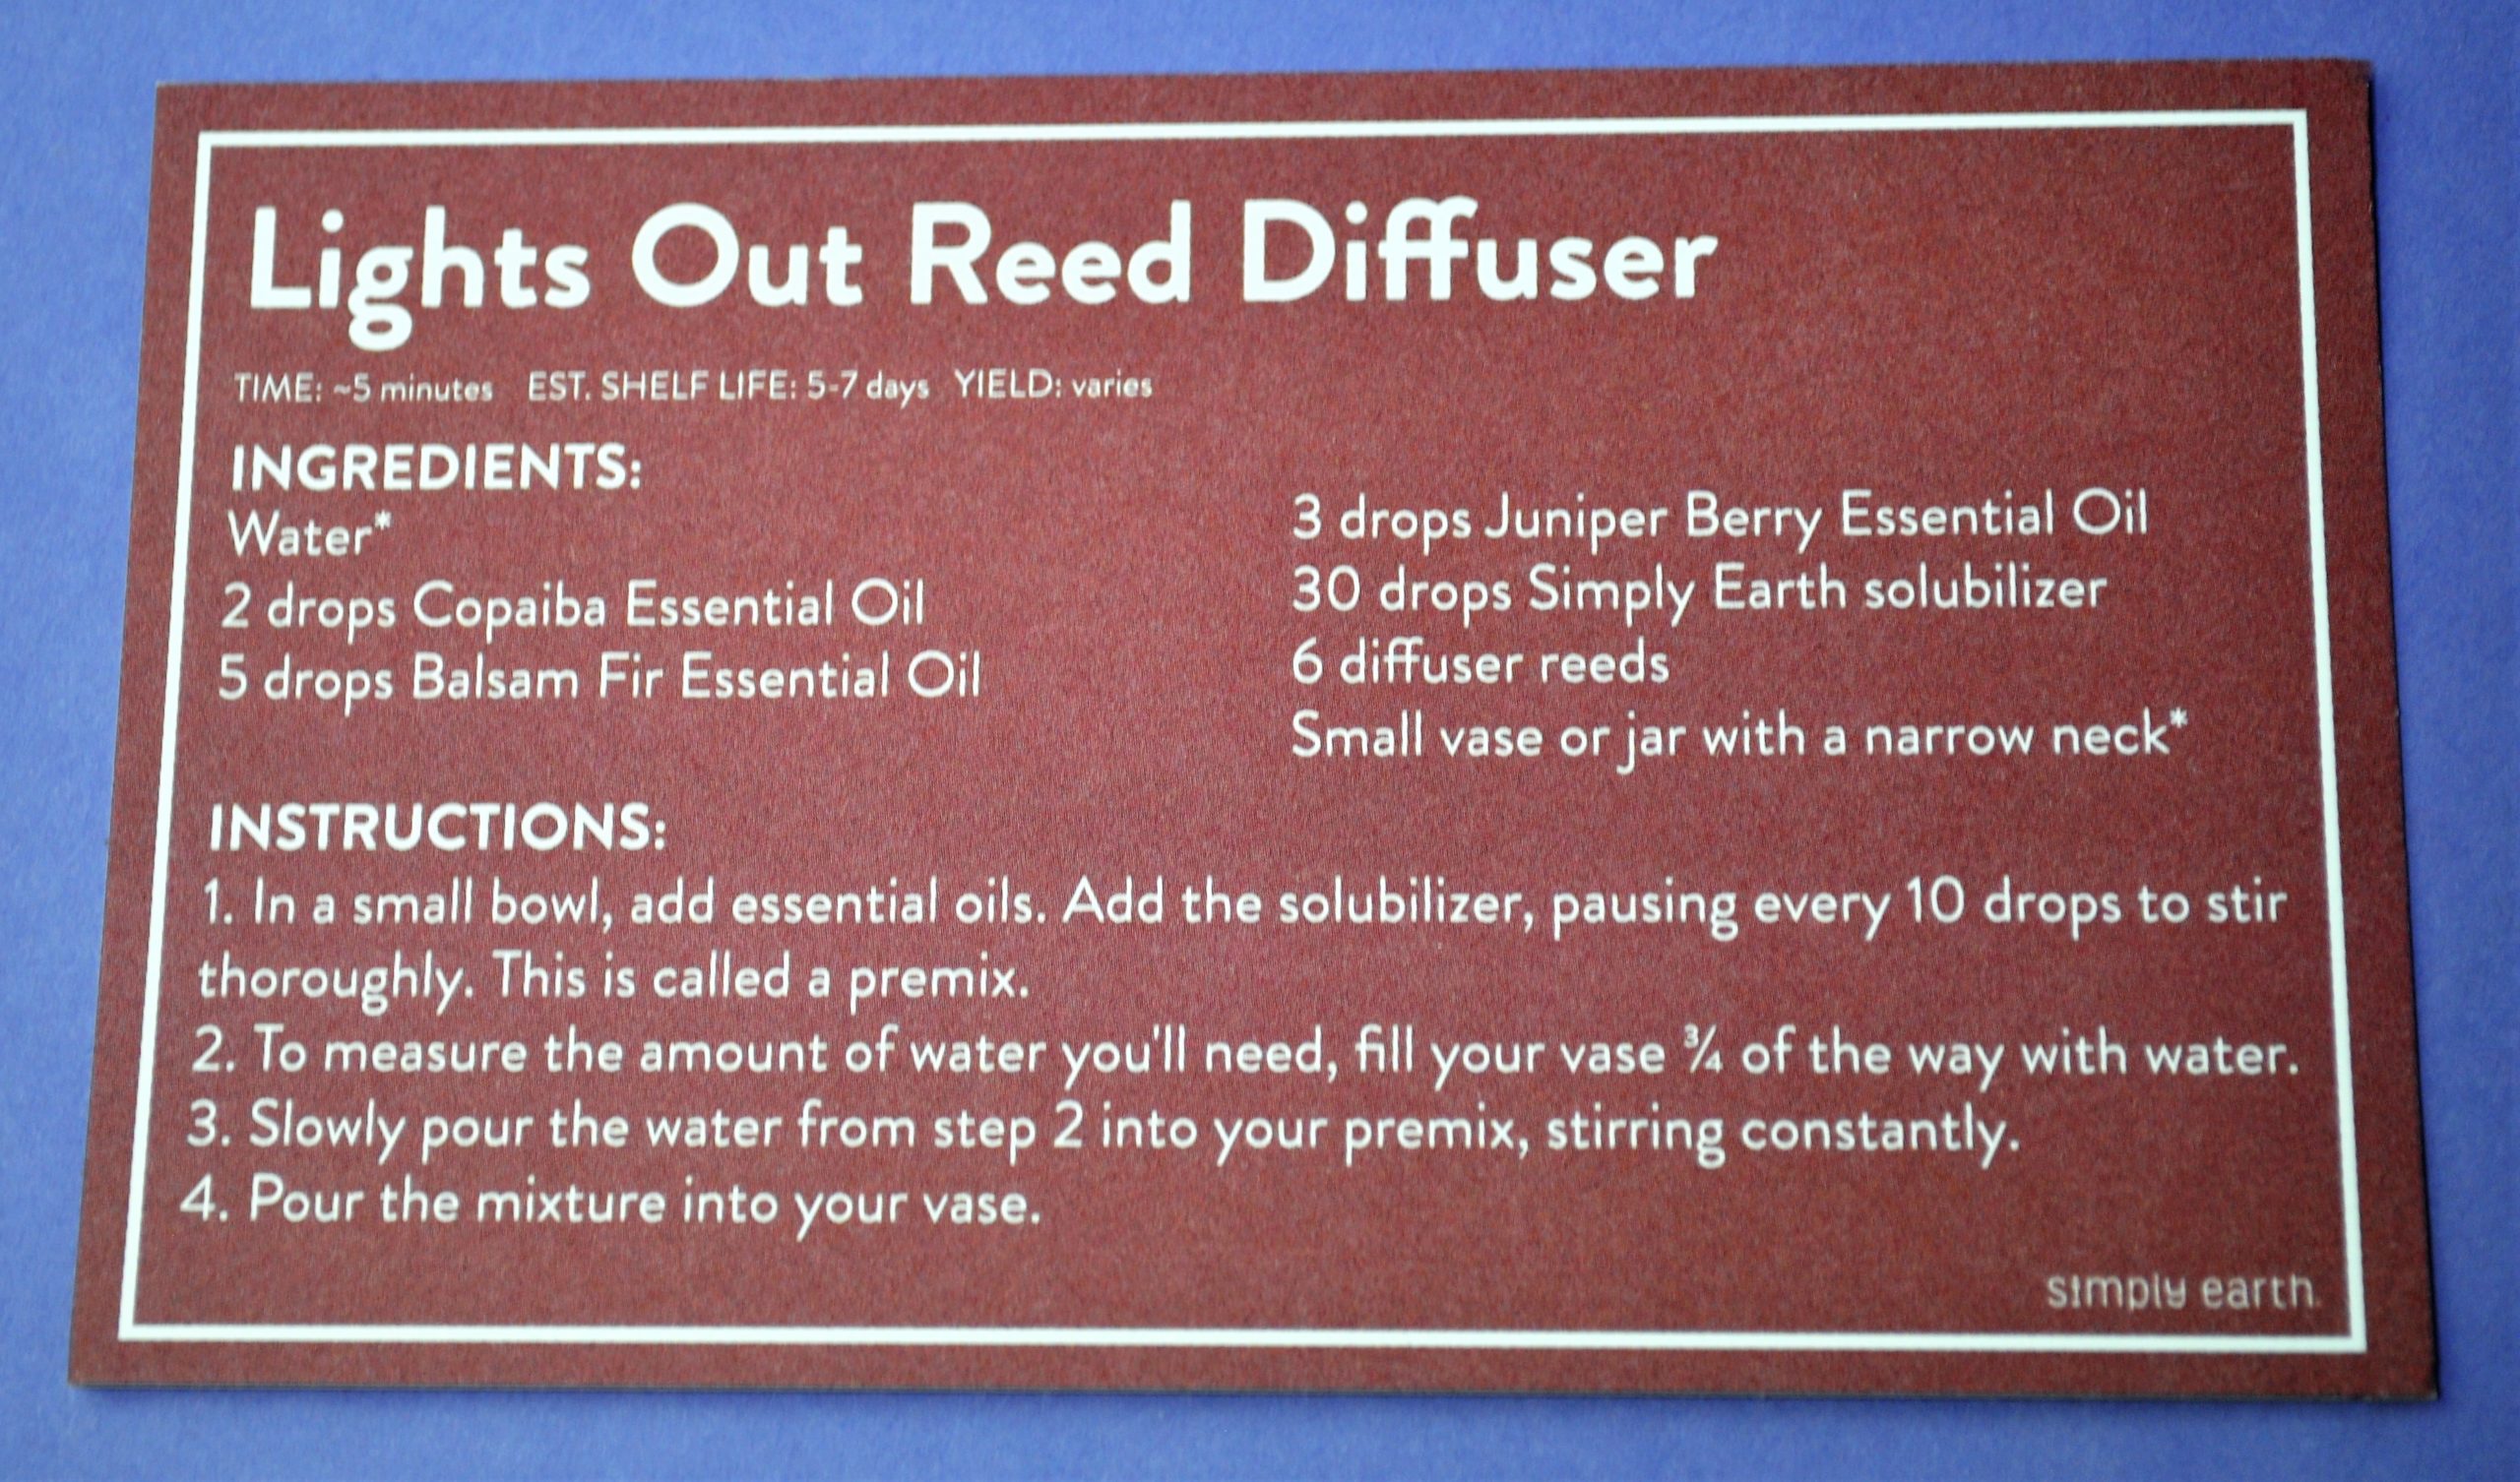 Lights Out Reed Diffuser Recipe Card